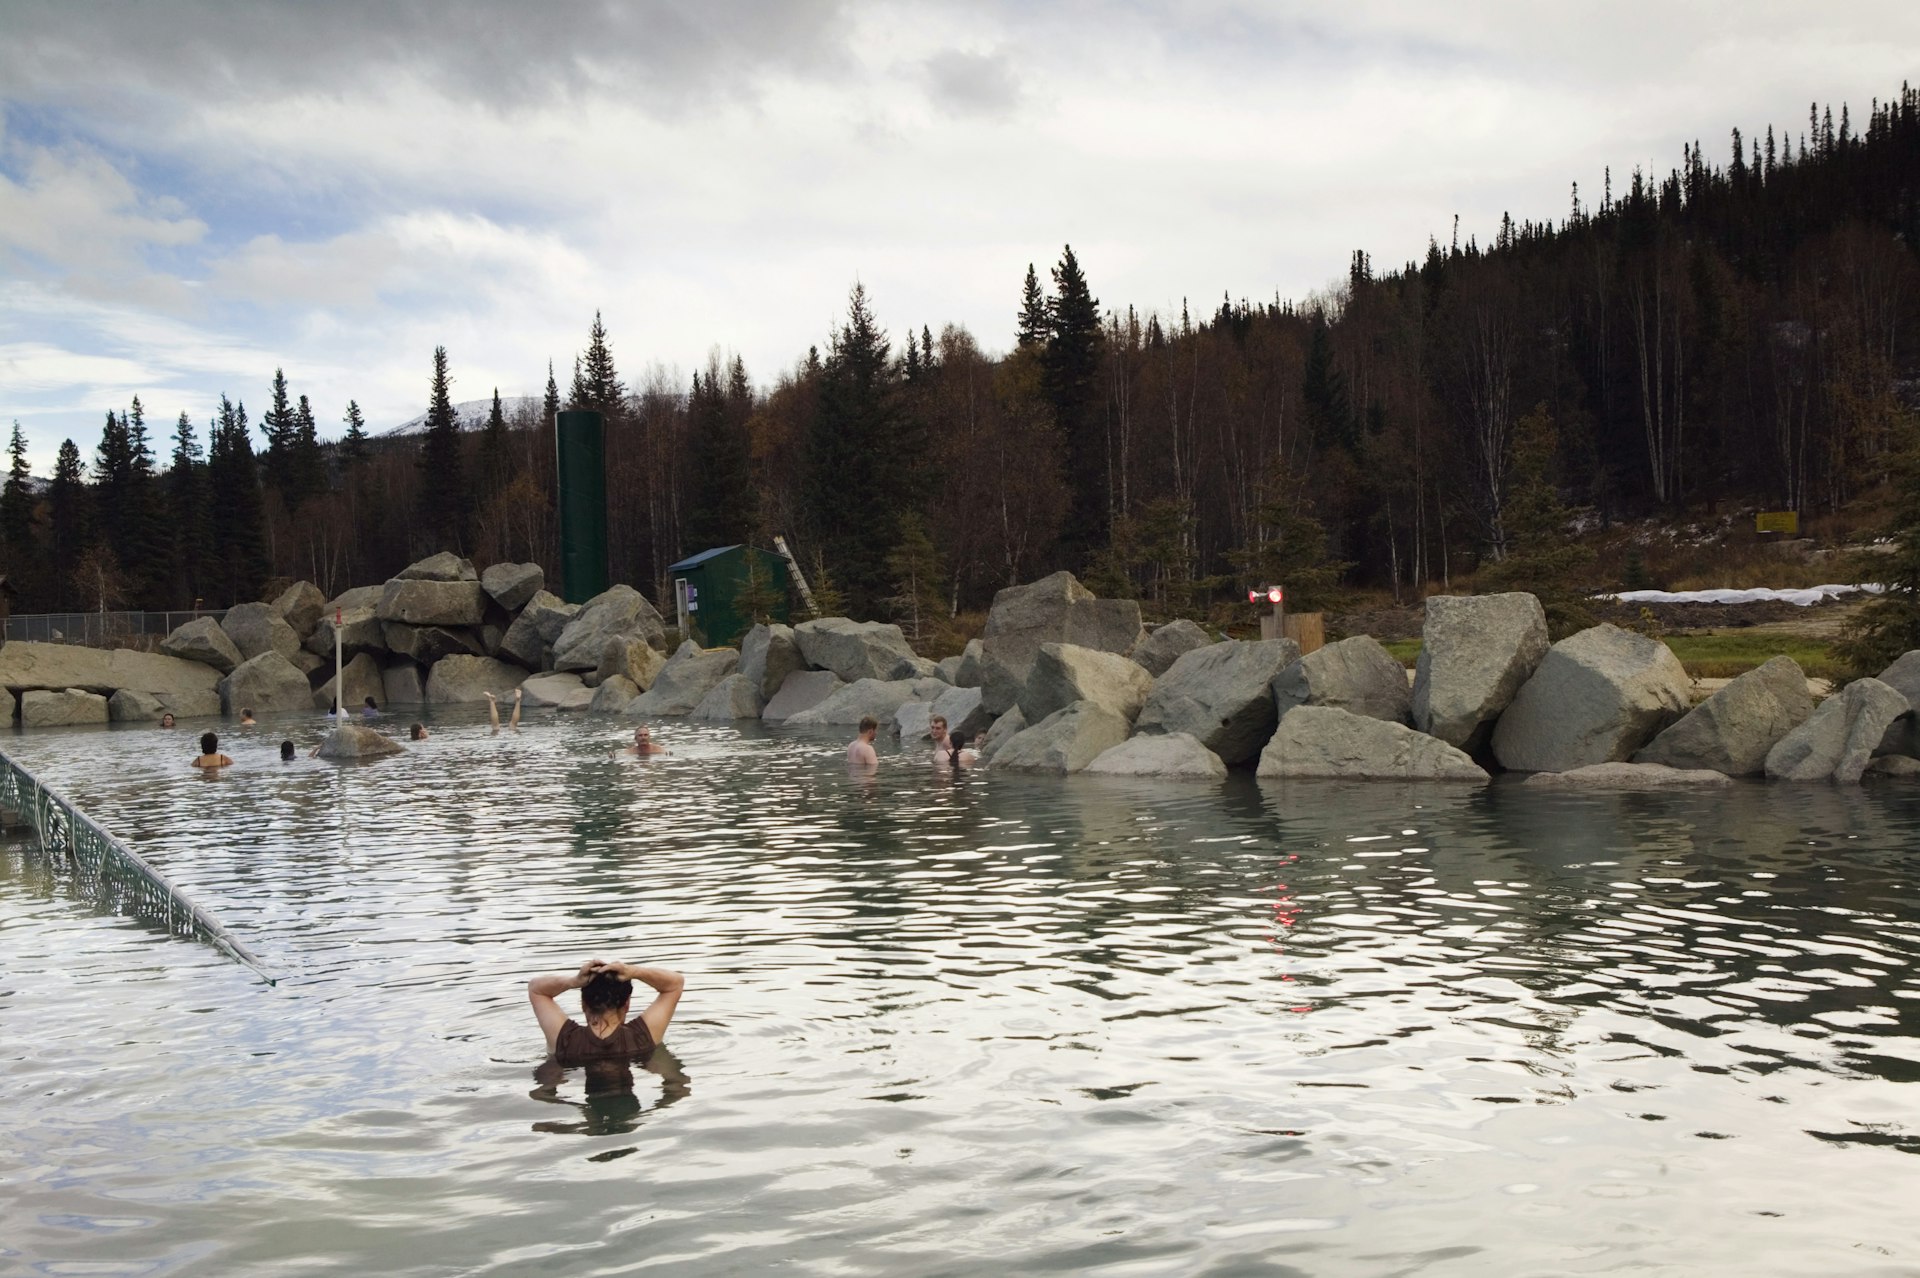 People soak in the naturally heated pools of Chena Hot Springs, Alaska